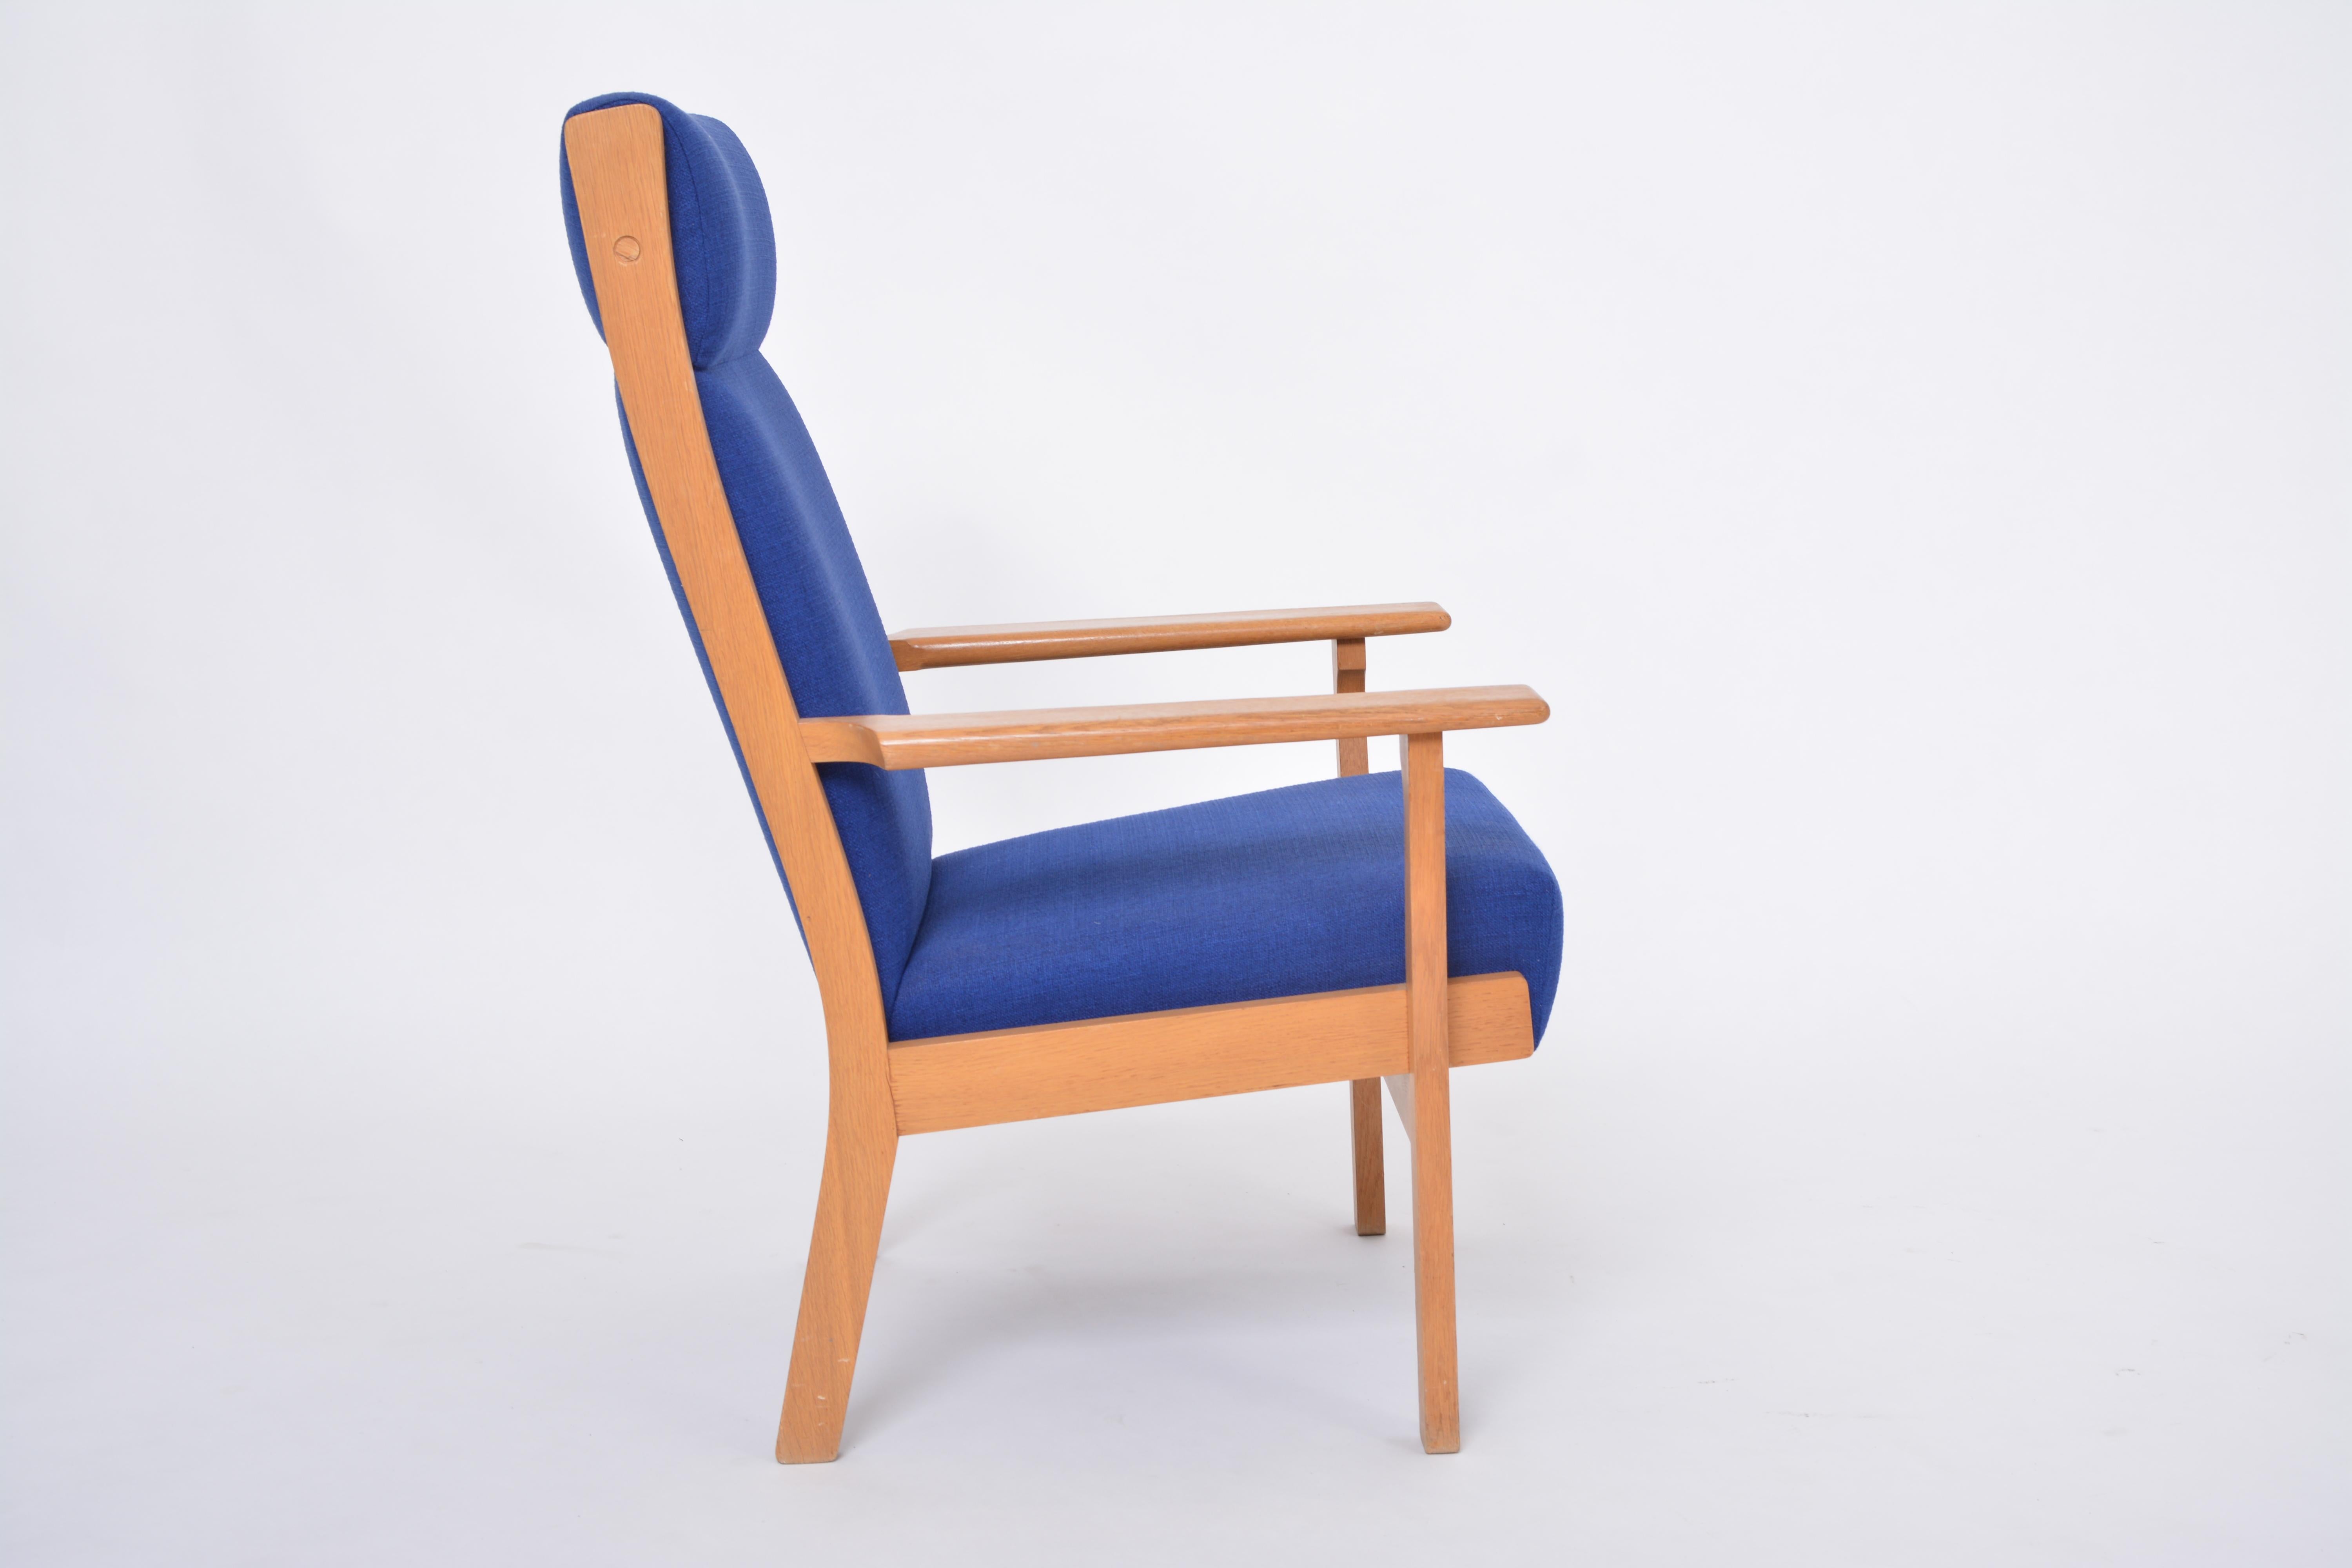 Reupholstered Danish Mid-Century Modern GE 181 a Chair by Hans Wegner for GETAMA For Sale 1